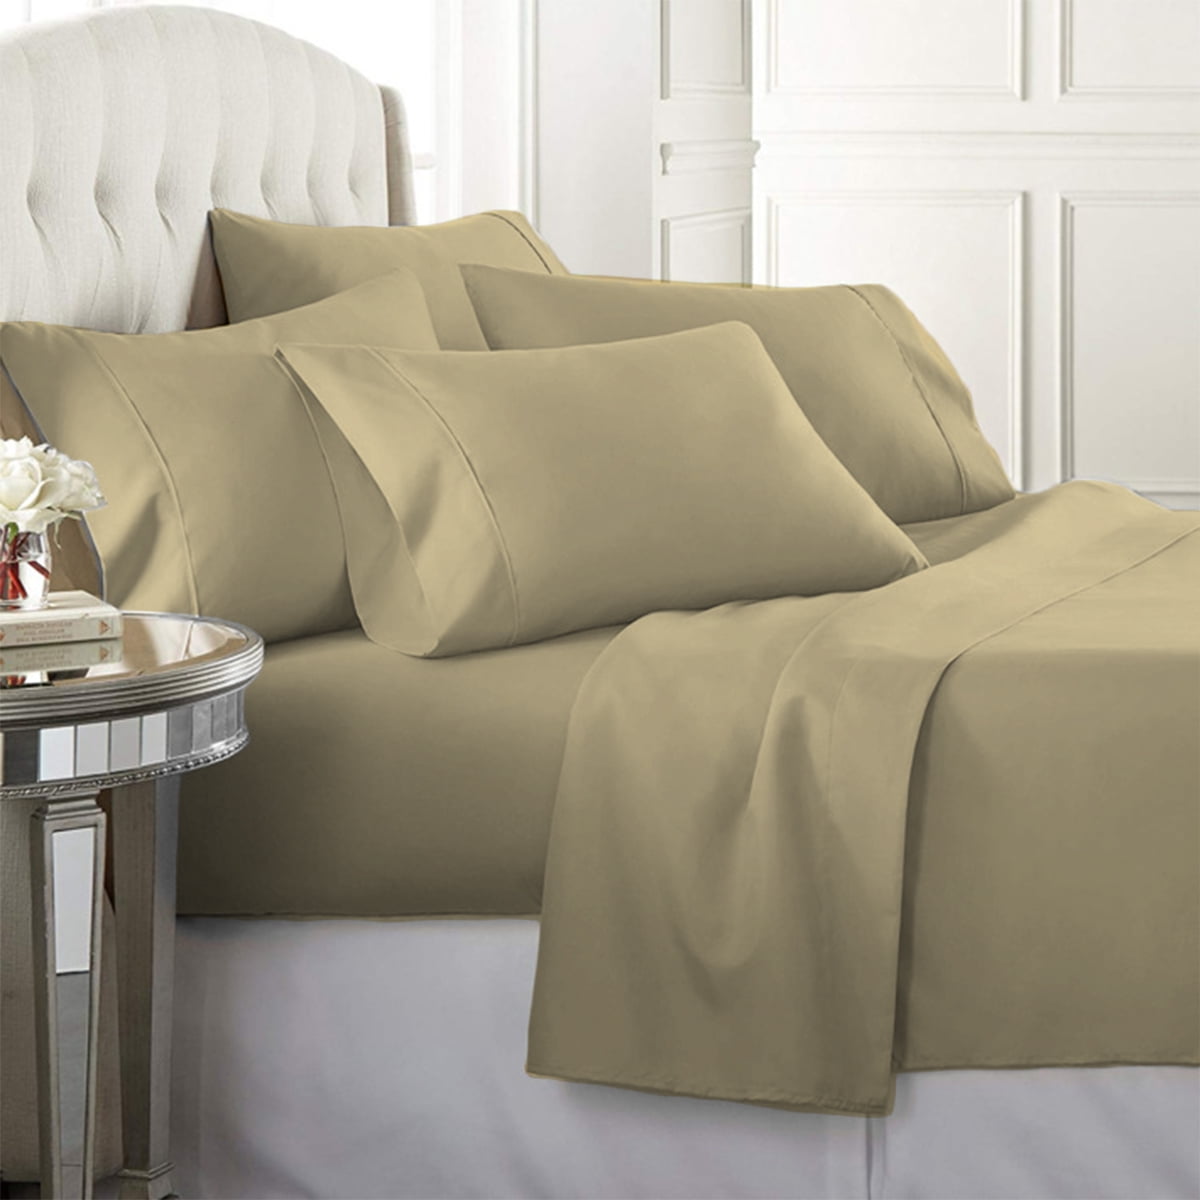 Branded " Chocolate " Solid Egyptian Cotton High Class Sheet Set Sizes "1500TC" 